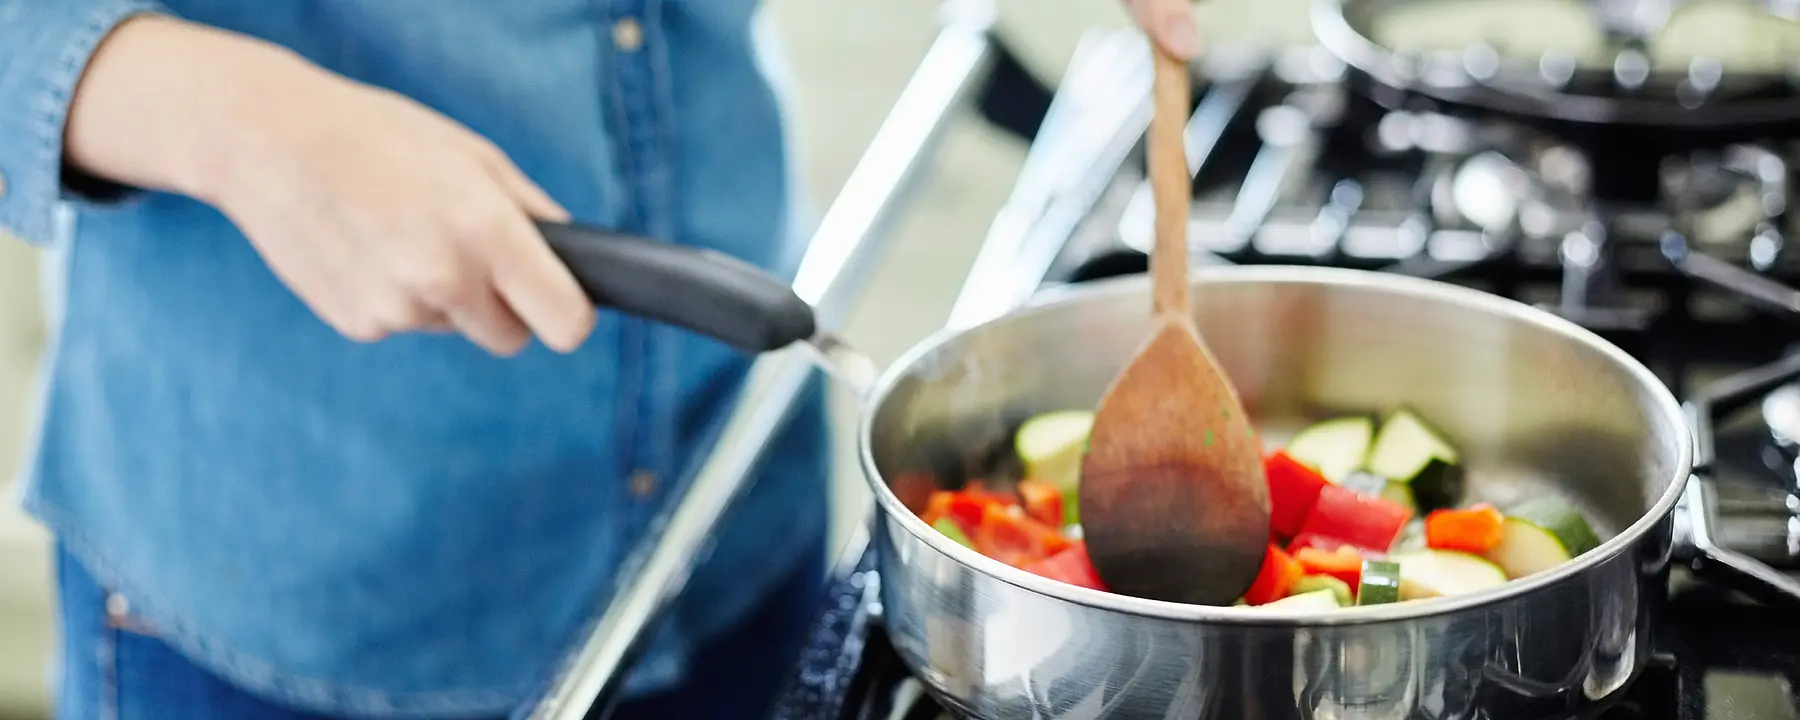 A woman cooks vegetables on a stovetop